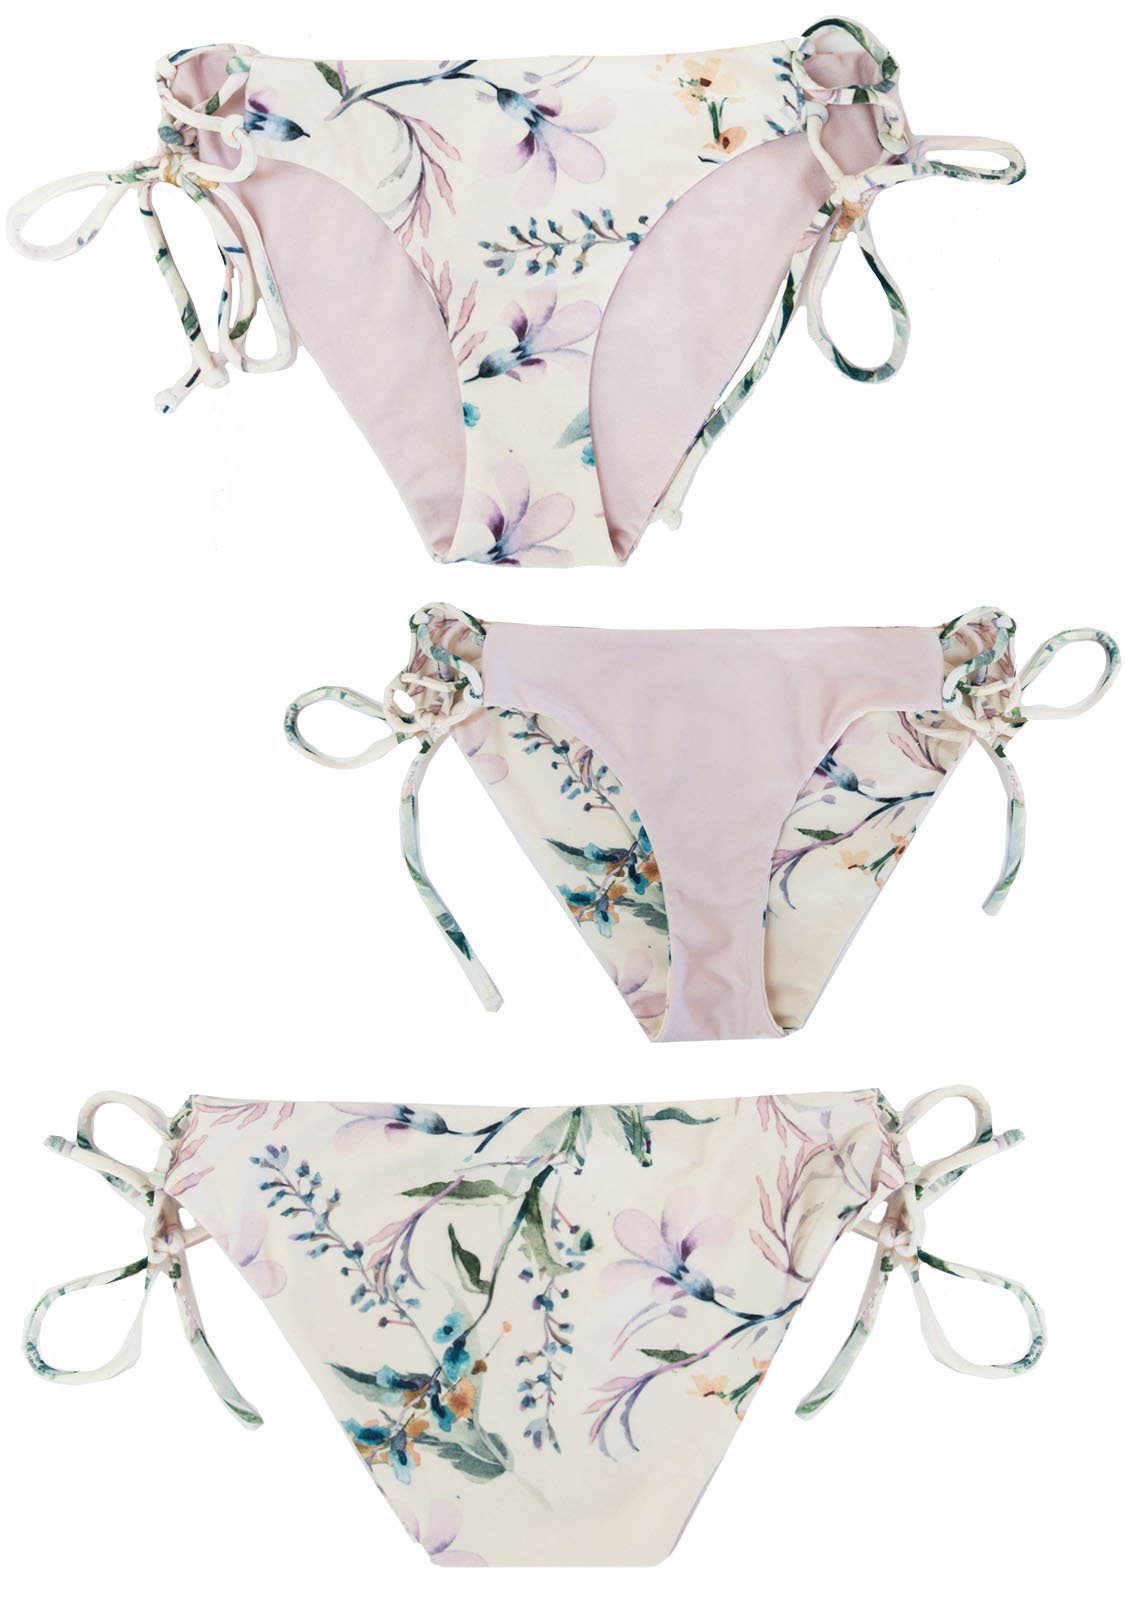 Reversible High Quality Floral Bikini Bottoms with side ties.